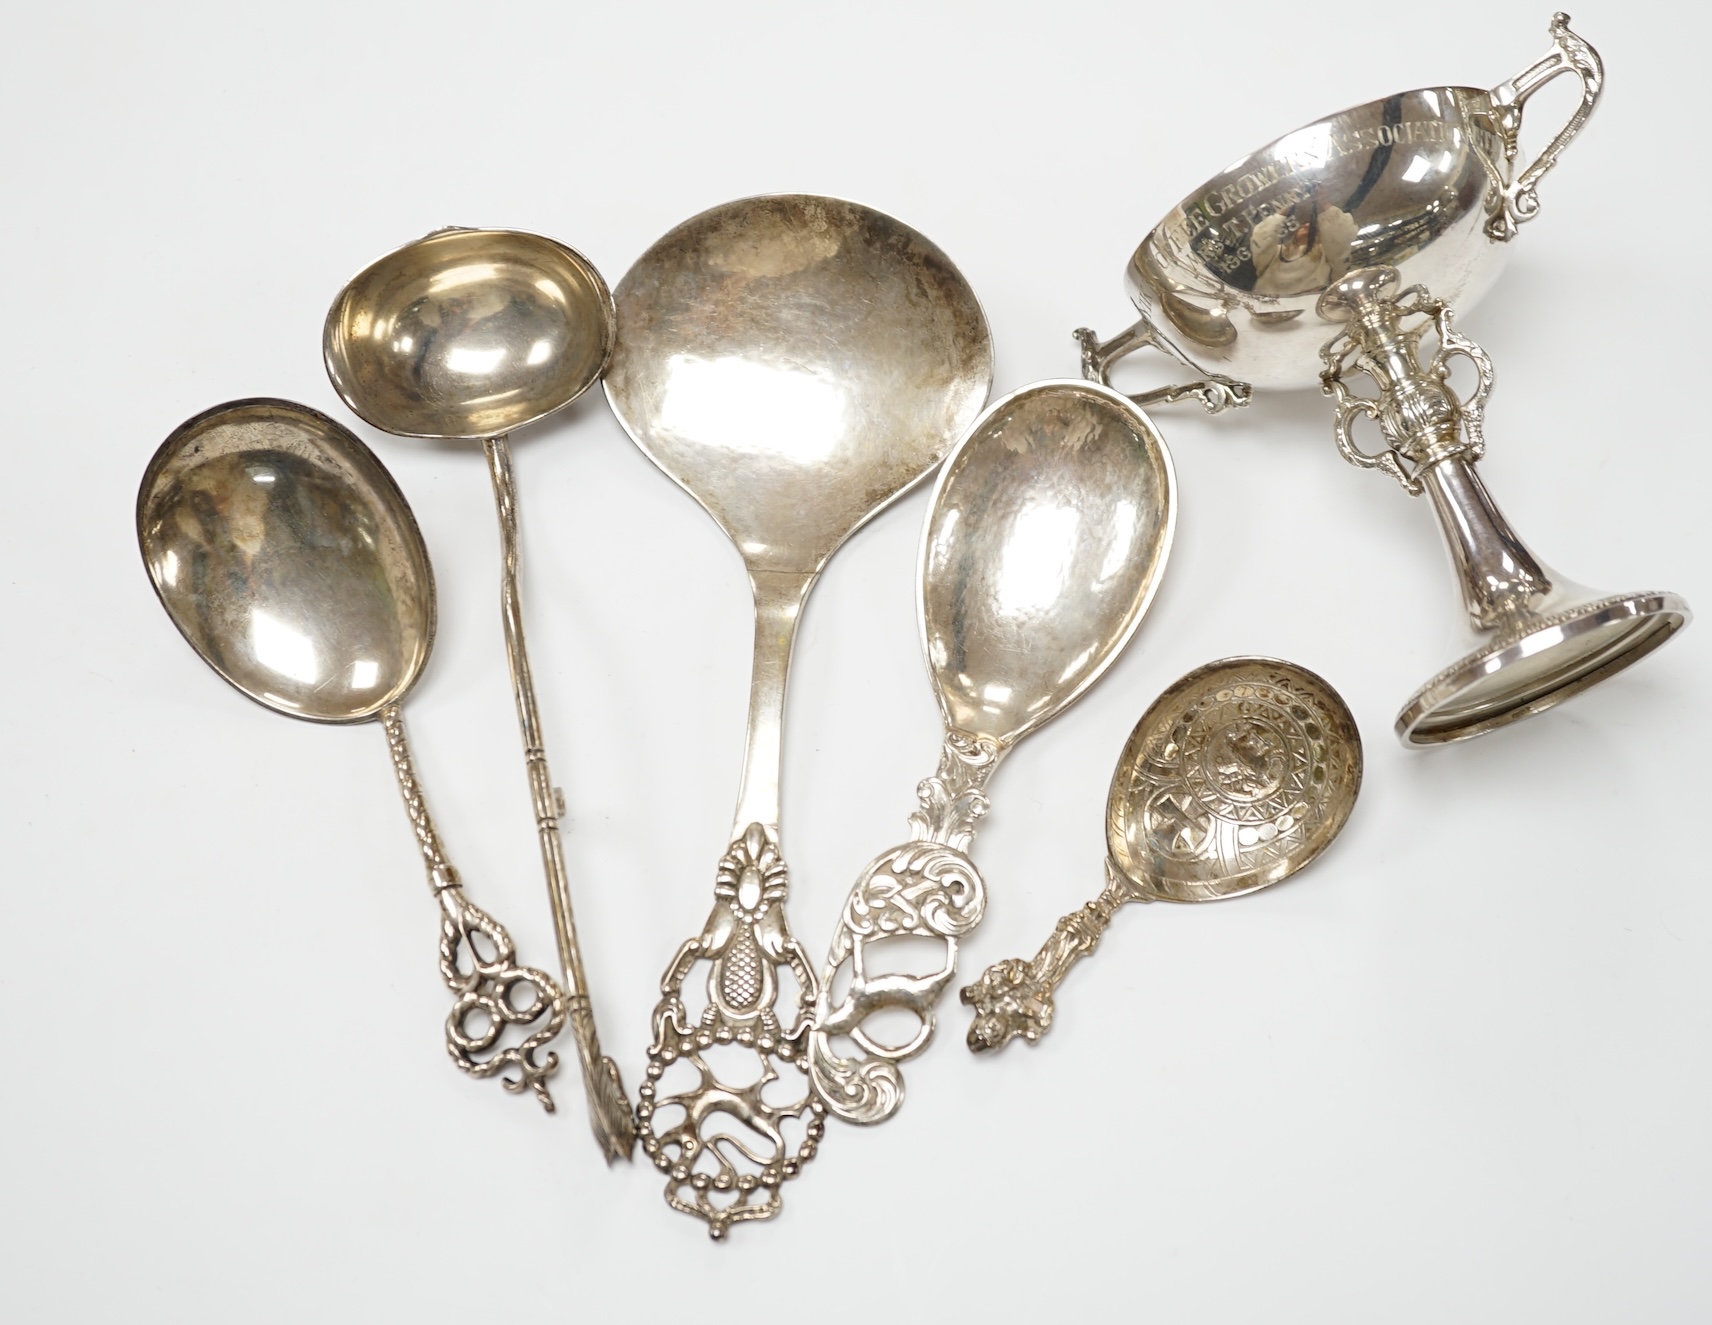 Five assorted early to mid 20th century Danish 830S spoons, largest 21.1cm, together with an Elizabeth II silver two handled presentation trophy cup with engraved inscription relating to the 'Tanganyika Coffee Growers As